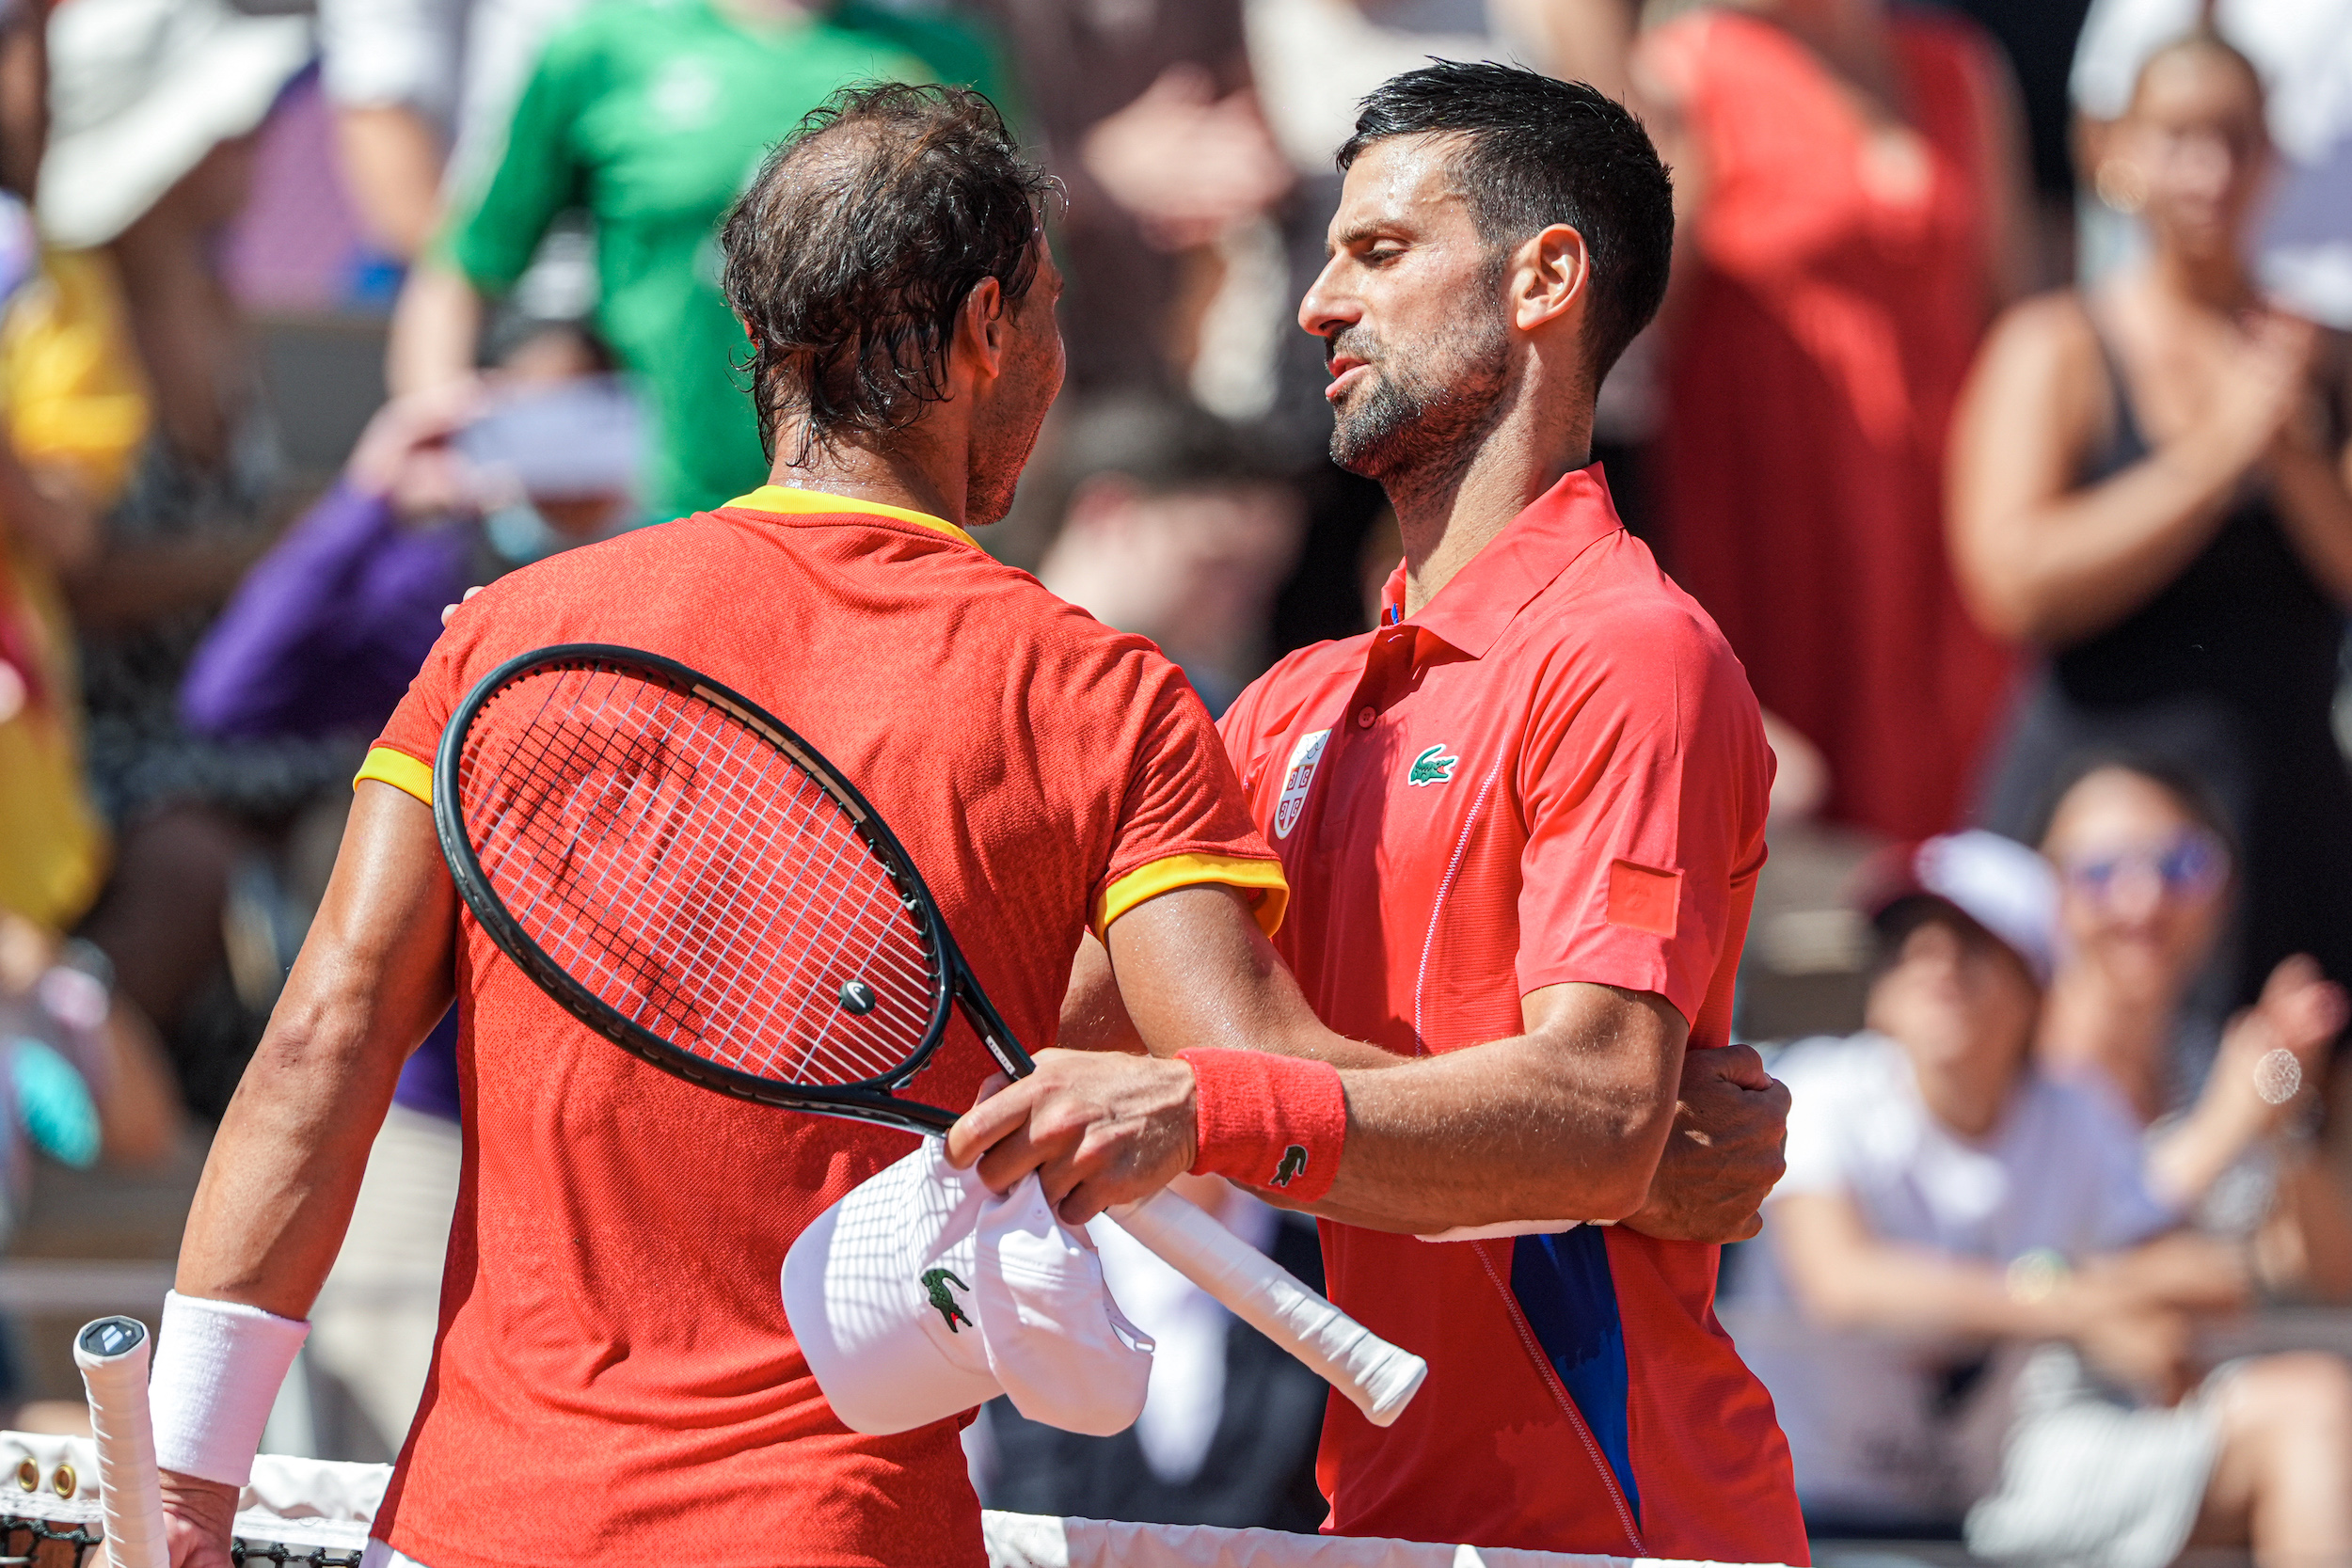 PARIS, FRANCE - JULY 29: Rafael Nadal of Spain, Novak Djokovic of Serbia competing in the Men's Singles Second Round during Day 3 of Tennis - Olympic Games Paris 2024 at Roland Garros on July 29, 2024 in Paris, France. (Photo by Joris Verwijst/BSR Agency/Getty Images)